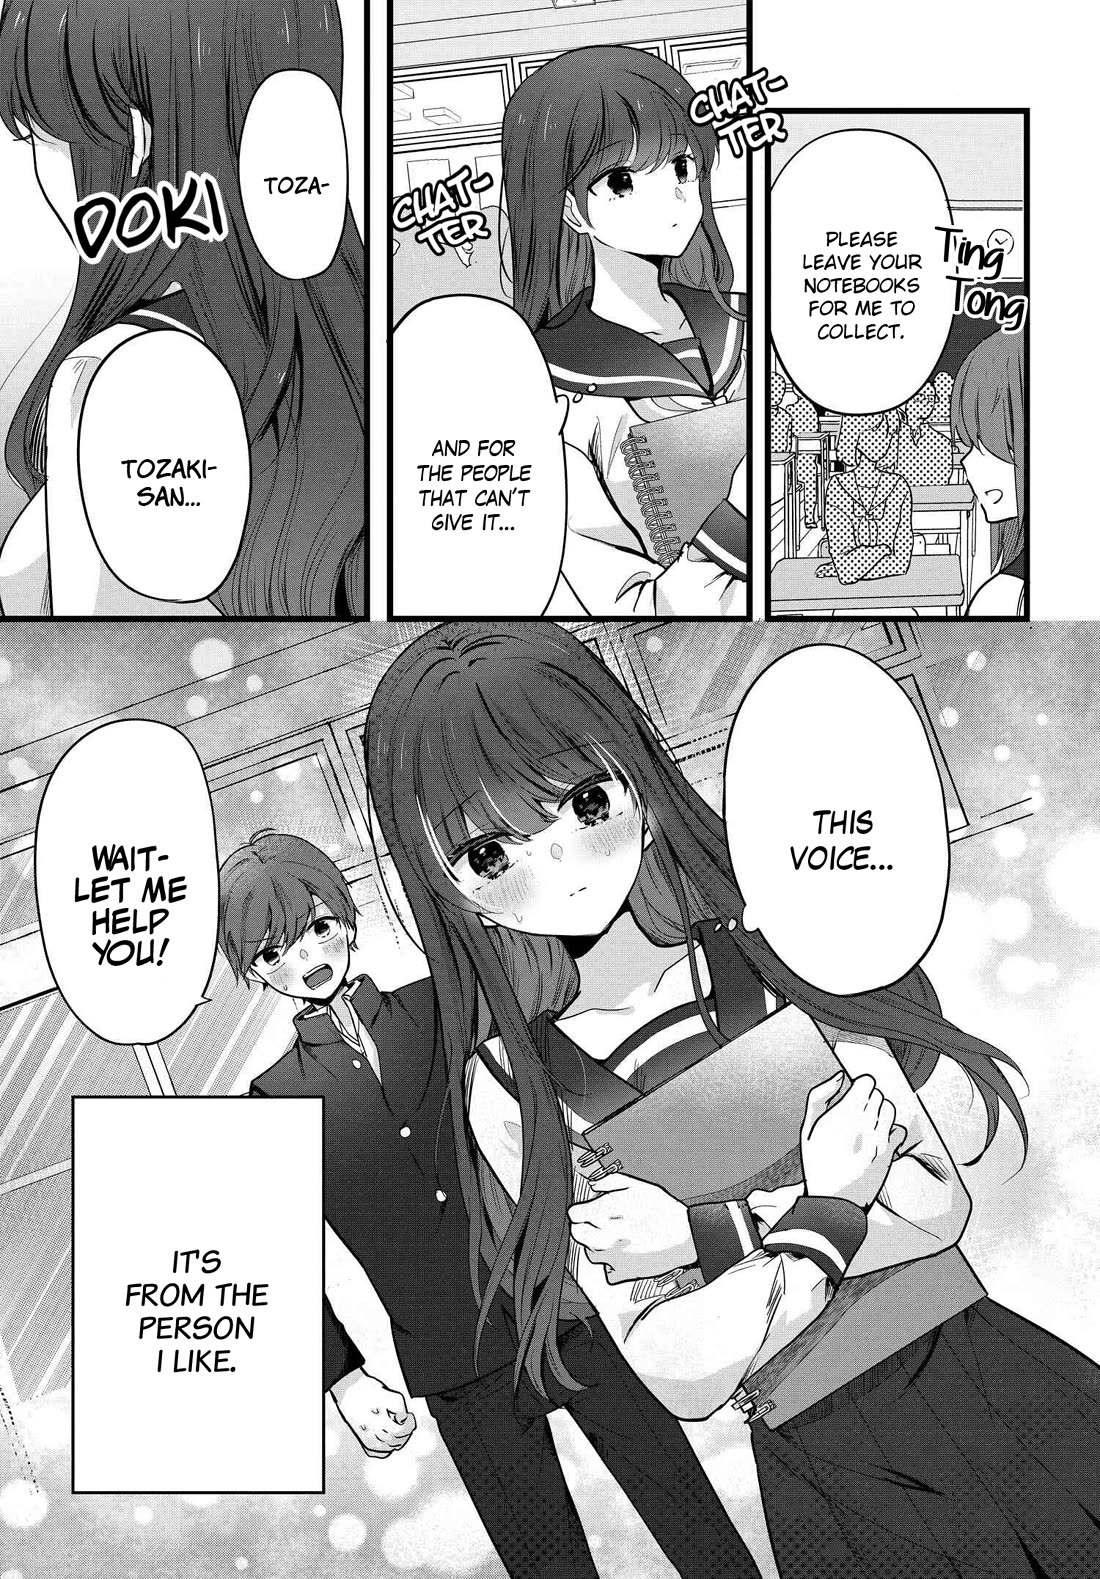 Tozaki-san Is Cold Only to Me - chapter 2 - #1